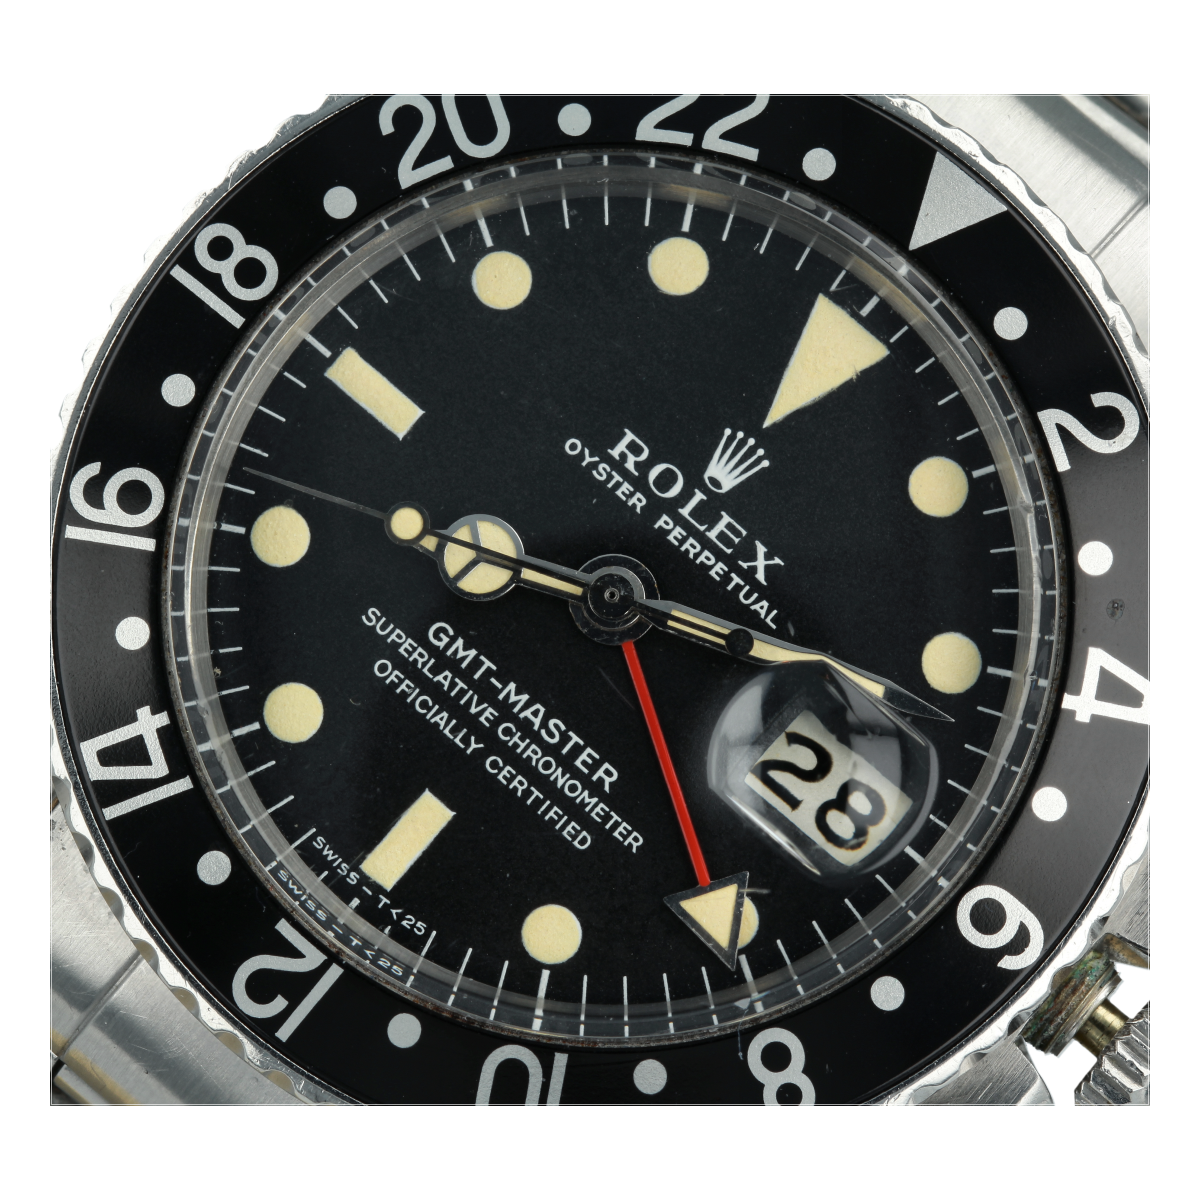 Rolex GMT-Master “Long E” (1969) Buy pre-owned Rolex watch